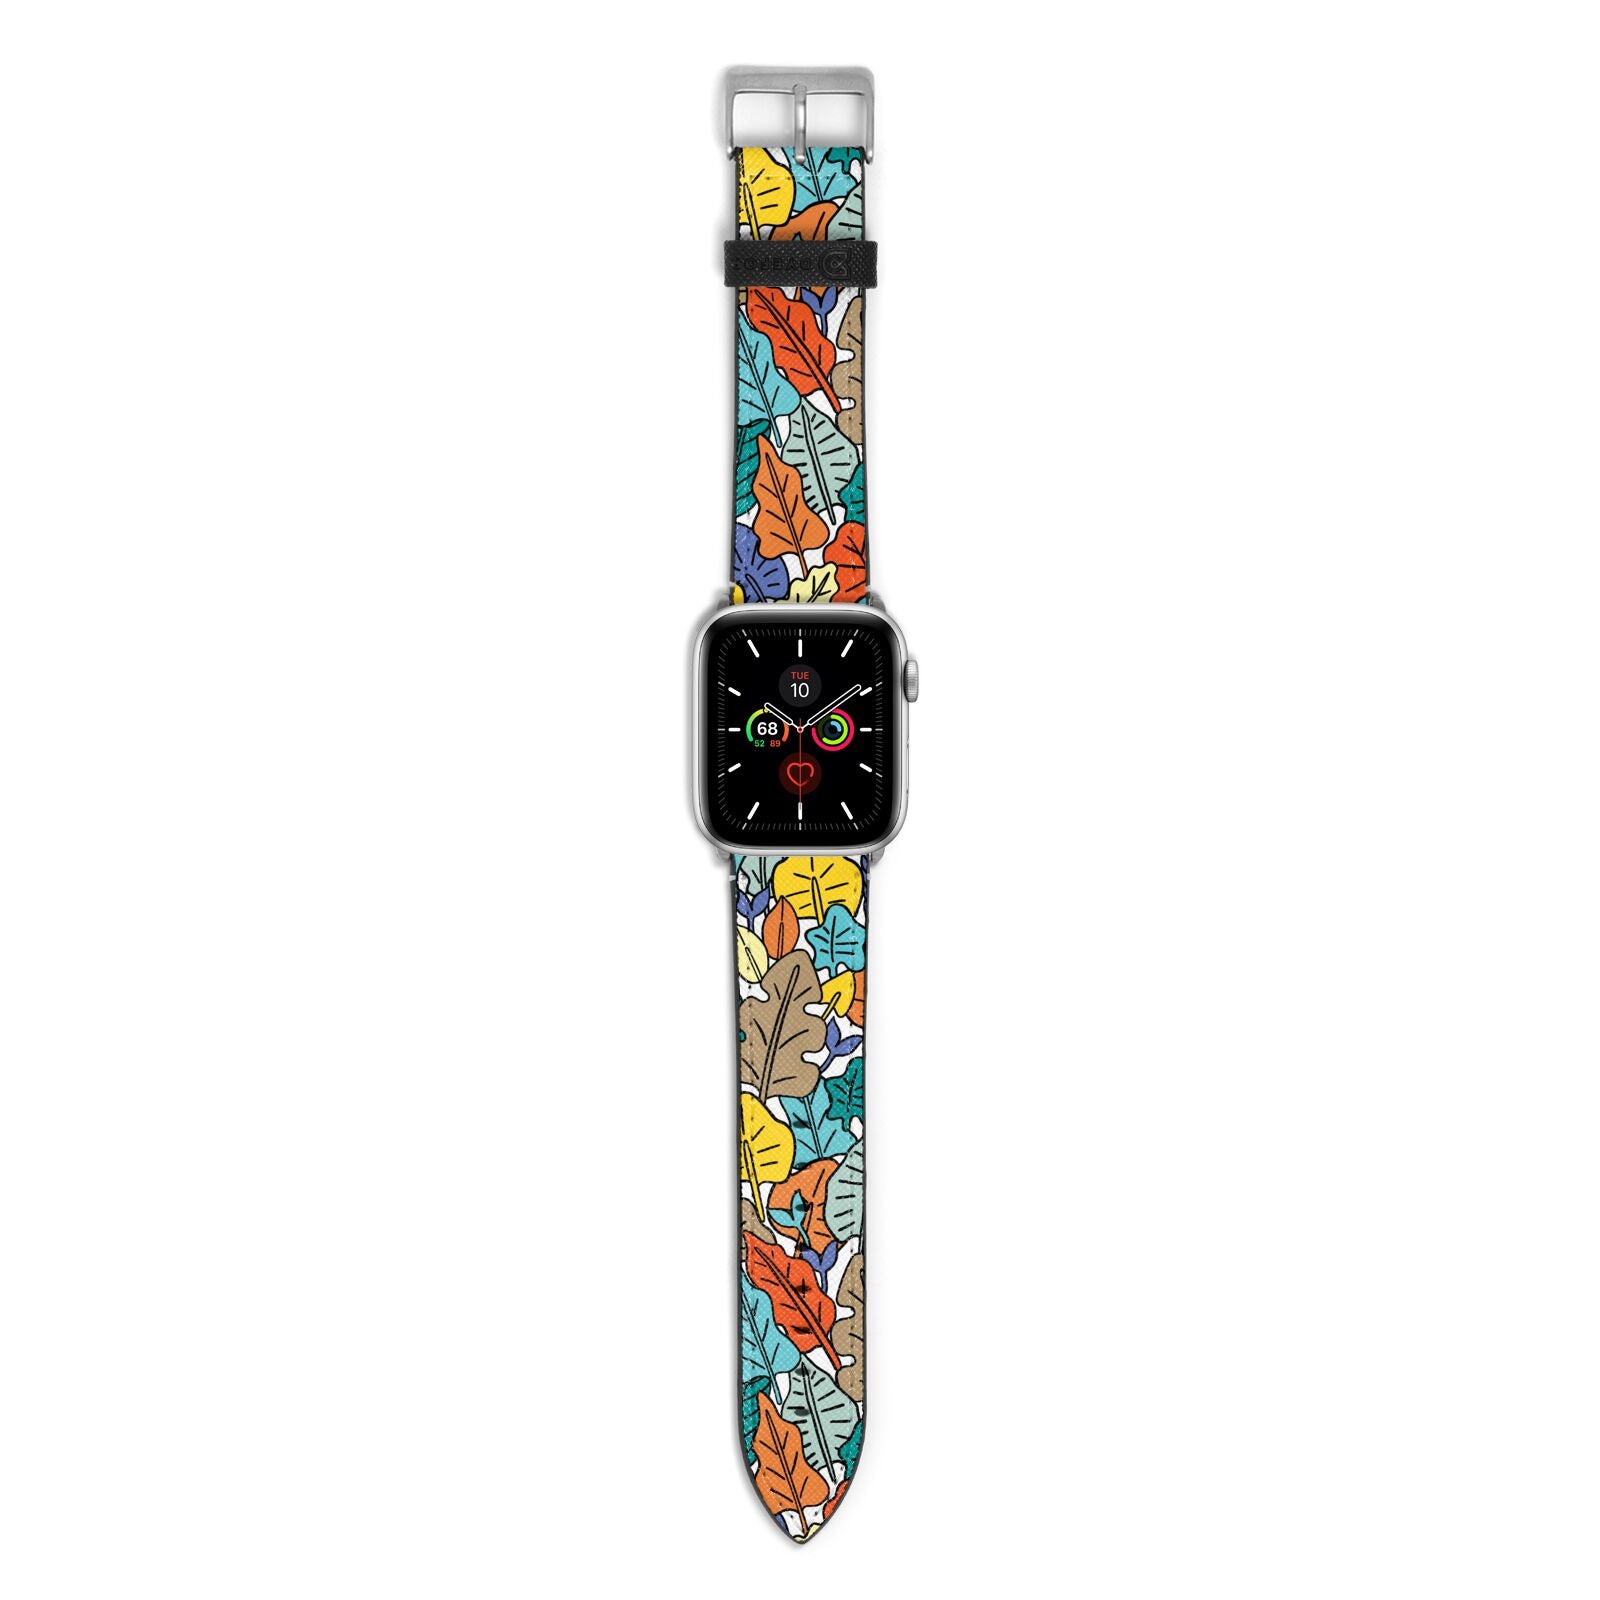 Autumn Leaves Apple Watch Strap with Silver Hardware